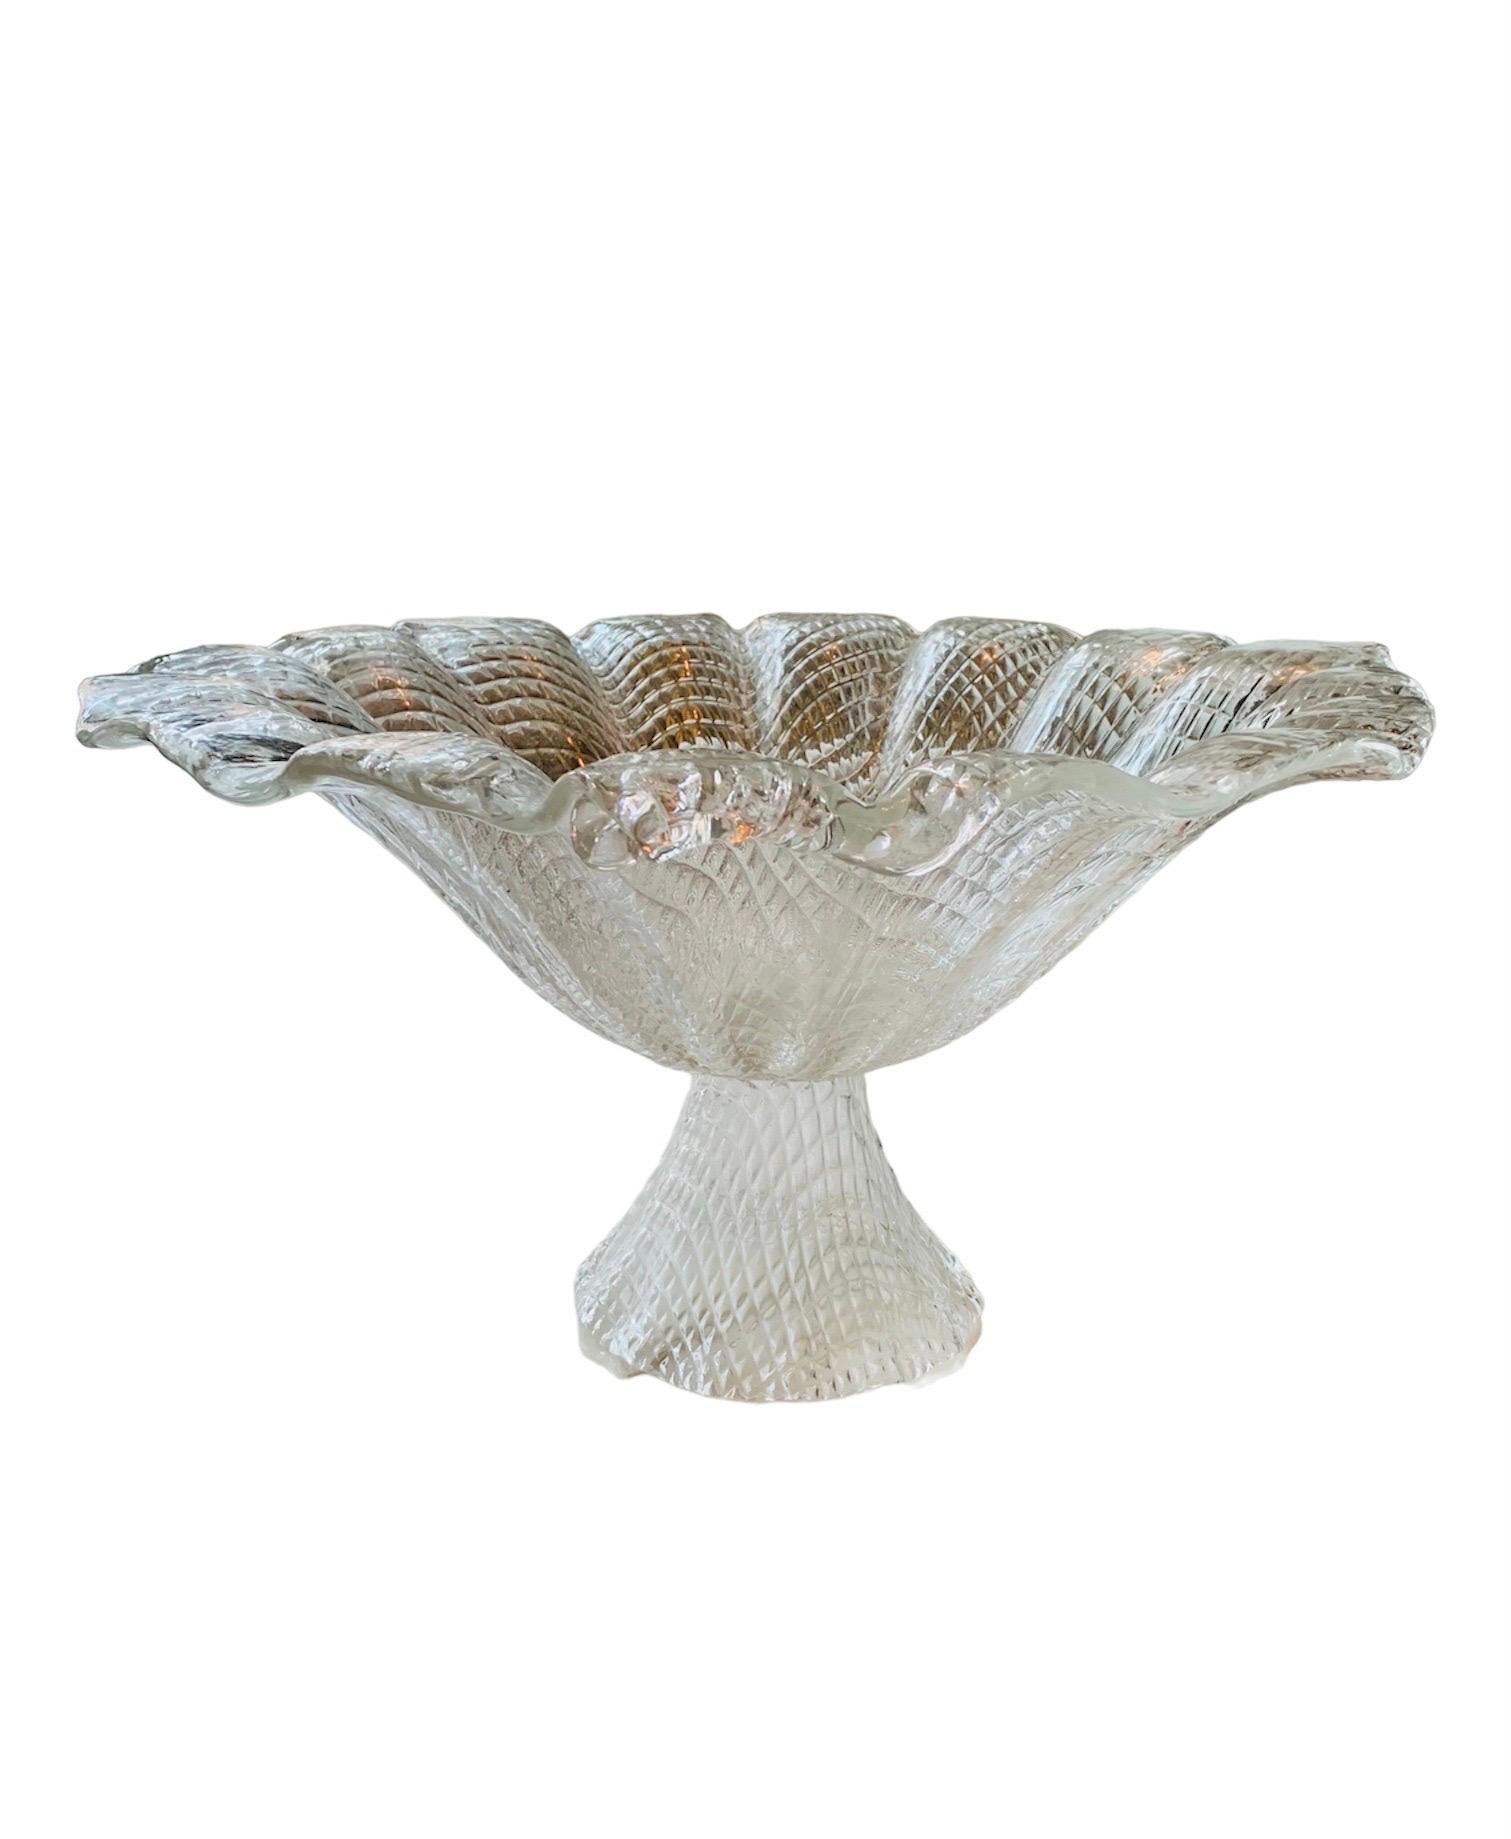 Italian 1970s Murano Glass Footed Vessel Compote in the Style of Barovier and Toso